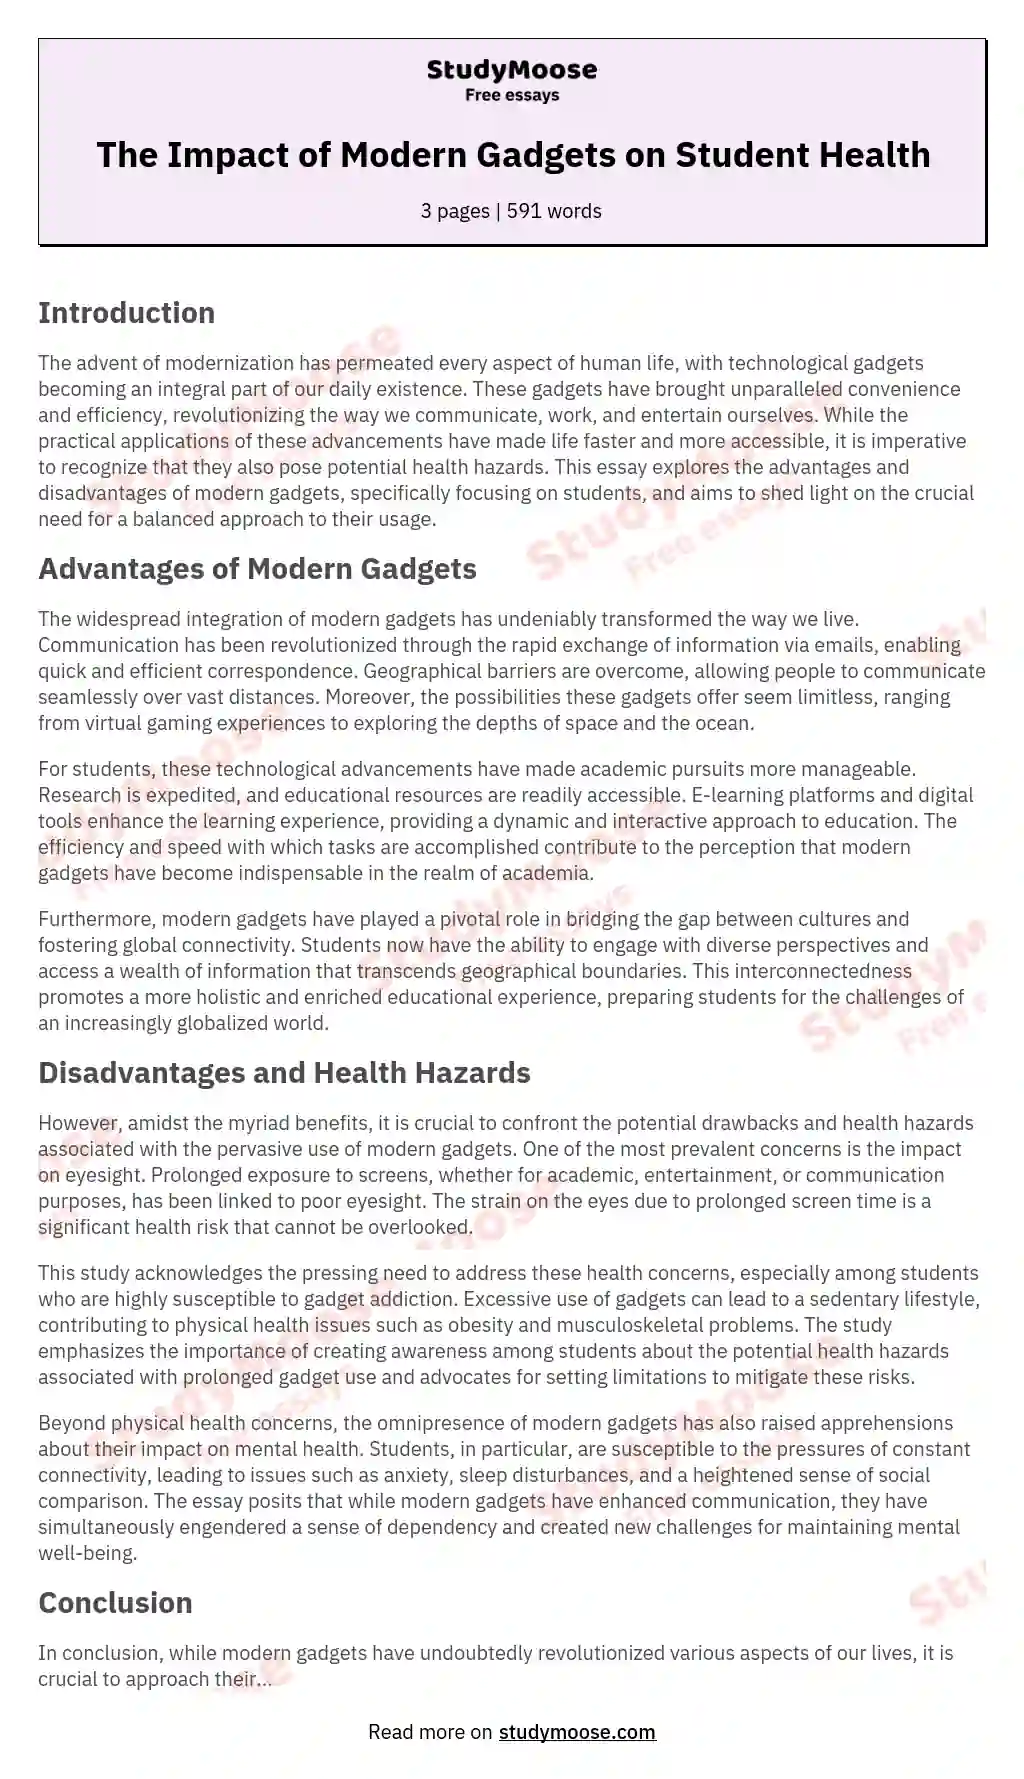 The Impact of Modern Gadgets on Student Health essay